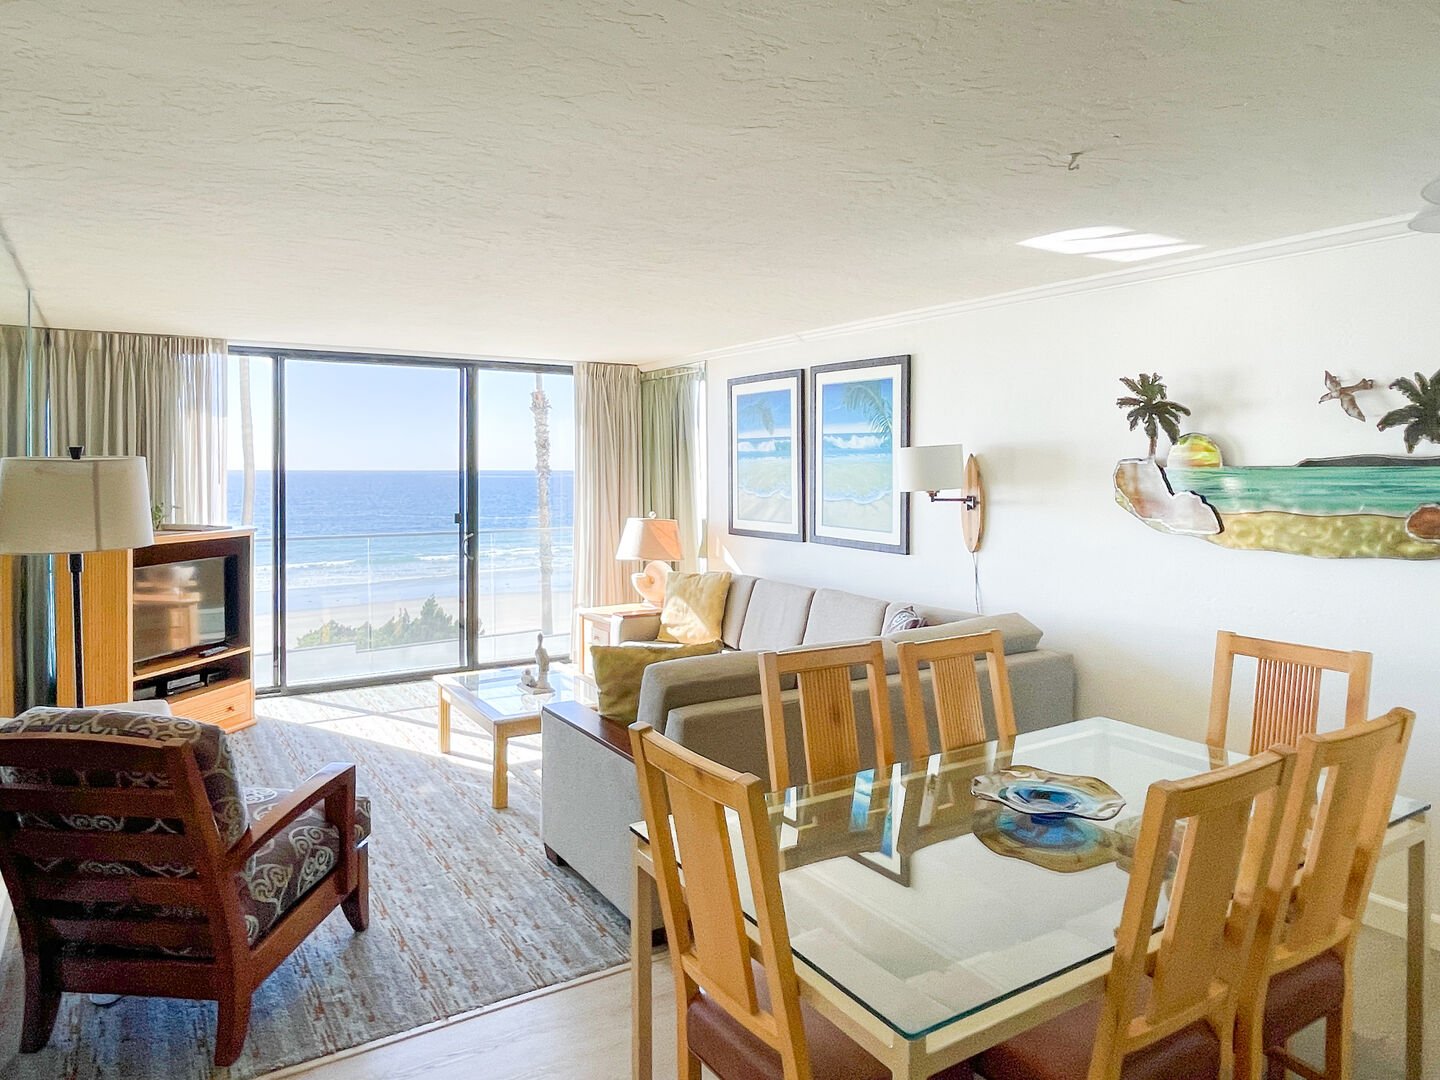 Living / Dining area with ocean views!